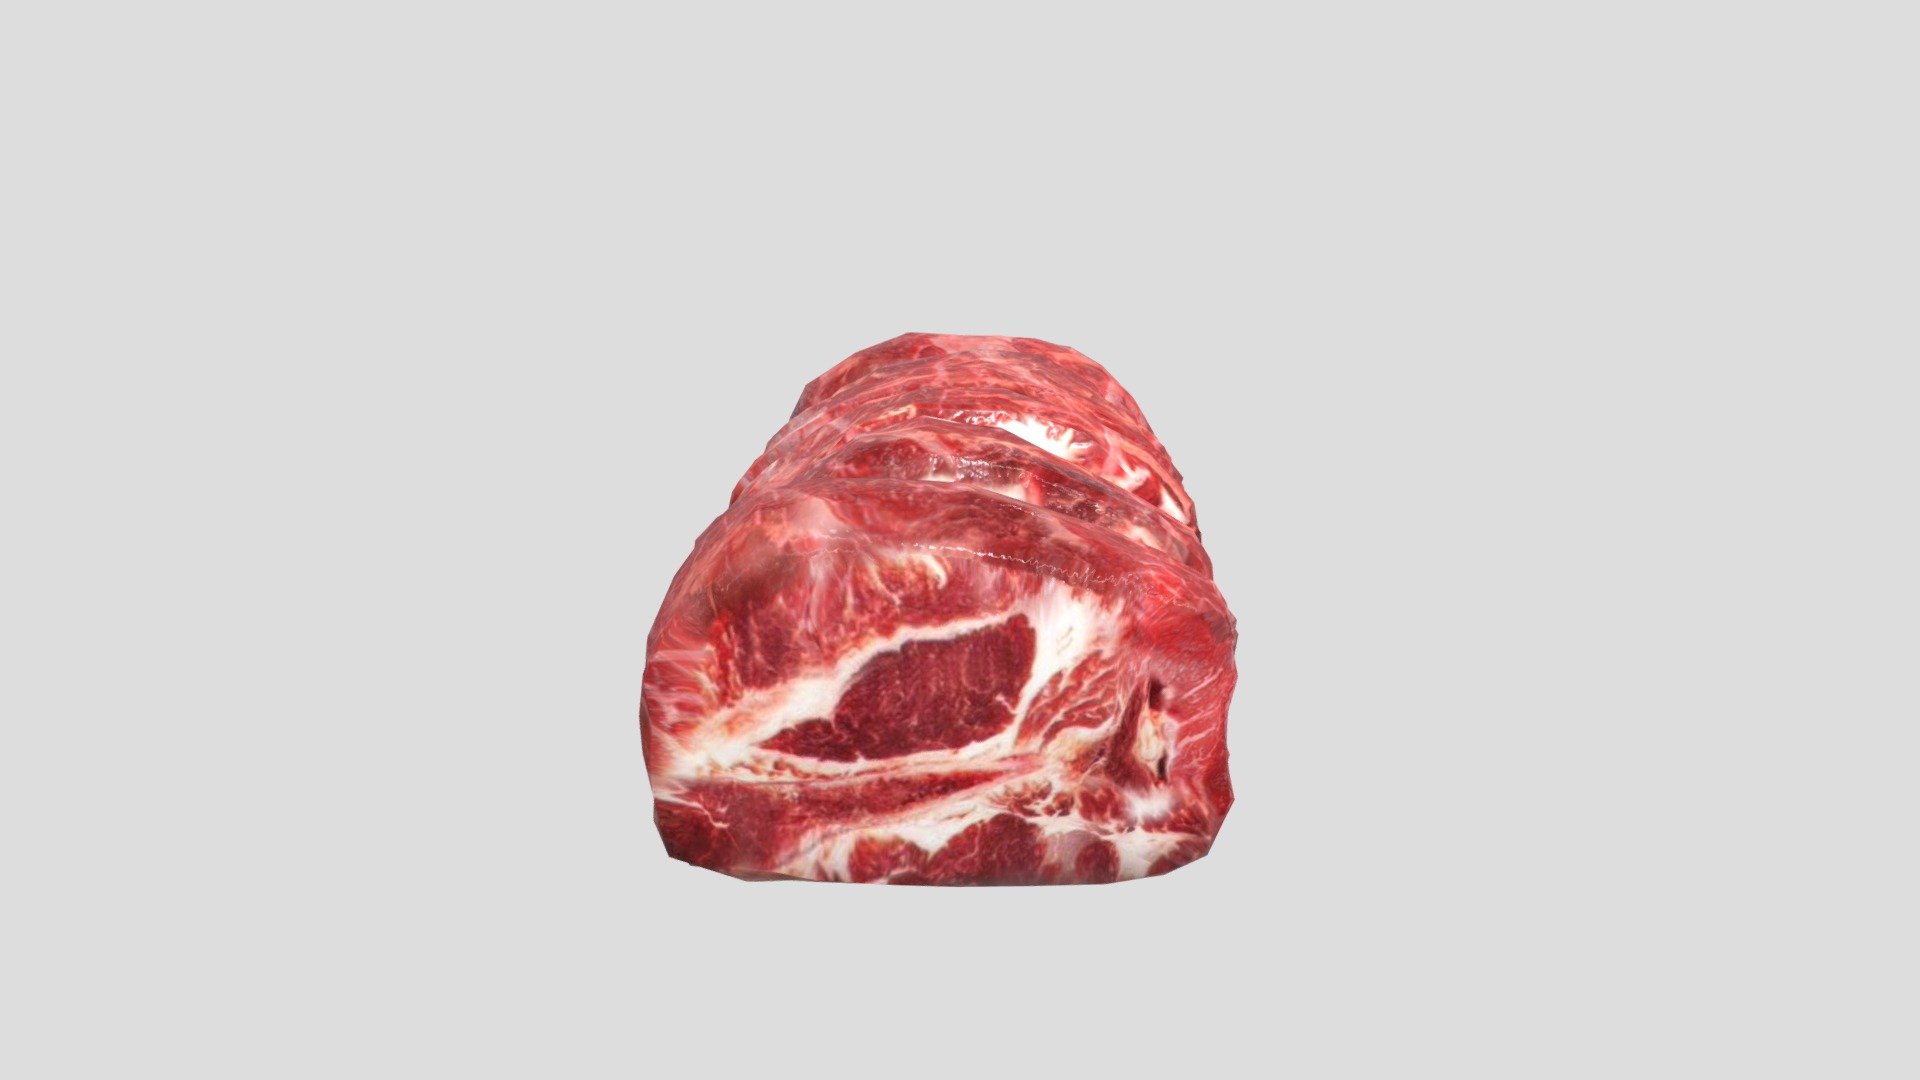 3d model of a BackBone cut of meat. Perfect for games, scenes or renders.

Model is correctly divided into main parts. All main parts are presented as separate parts therefore materials of objects are easy to be modified or removed and standard parts are easy to be replaced.

TEXTURES: Models includes high textures with maps: Base Color (.png) Height (.png) Metallic (.png) Normal (.png) Roughness (.png)

FORMATS: .obj .dae .stl .blend .fbx .3ds

GENERAL: Easy editable. Model is fully textured.

Vertices: 2,3k Polygons: 2,3k. All formats have been tested and work correctly.

Some files may need textures or materials adjusted or added depending on the program they are imported into 3d model